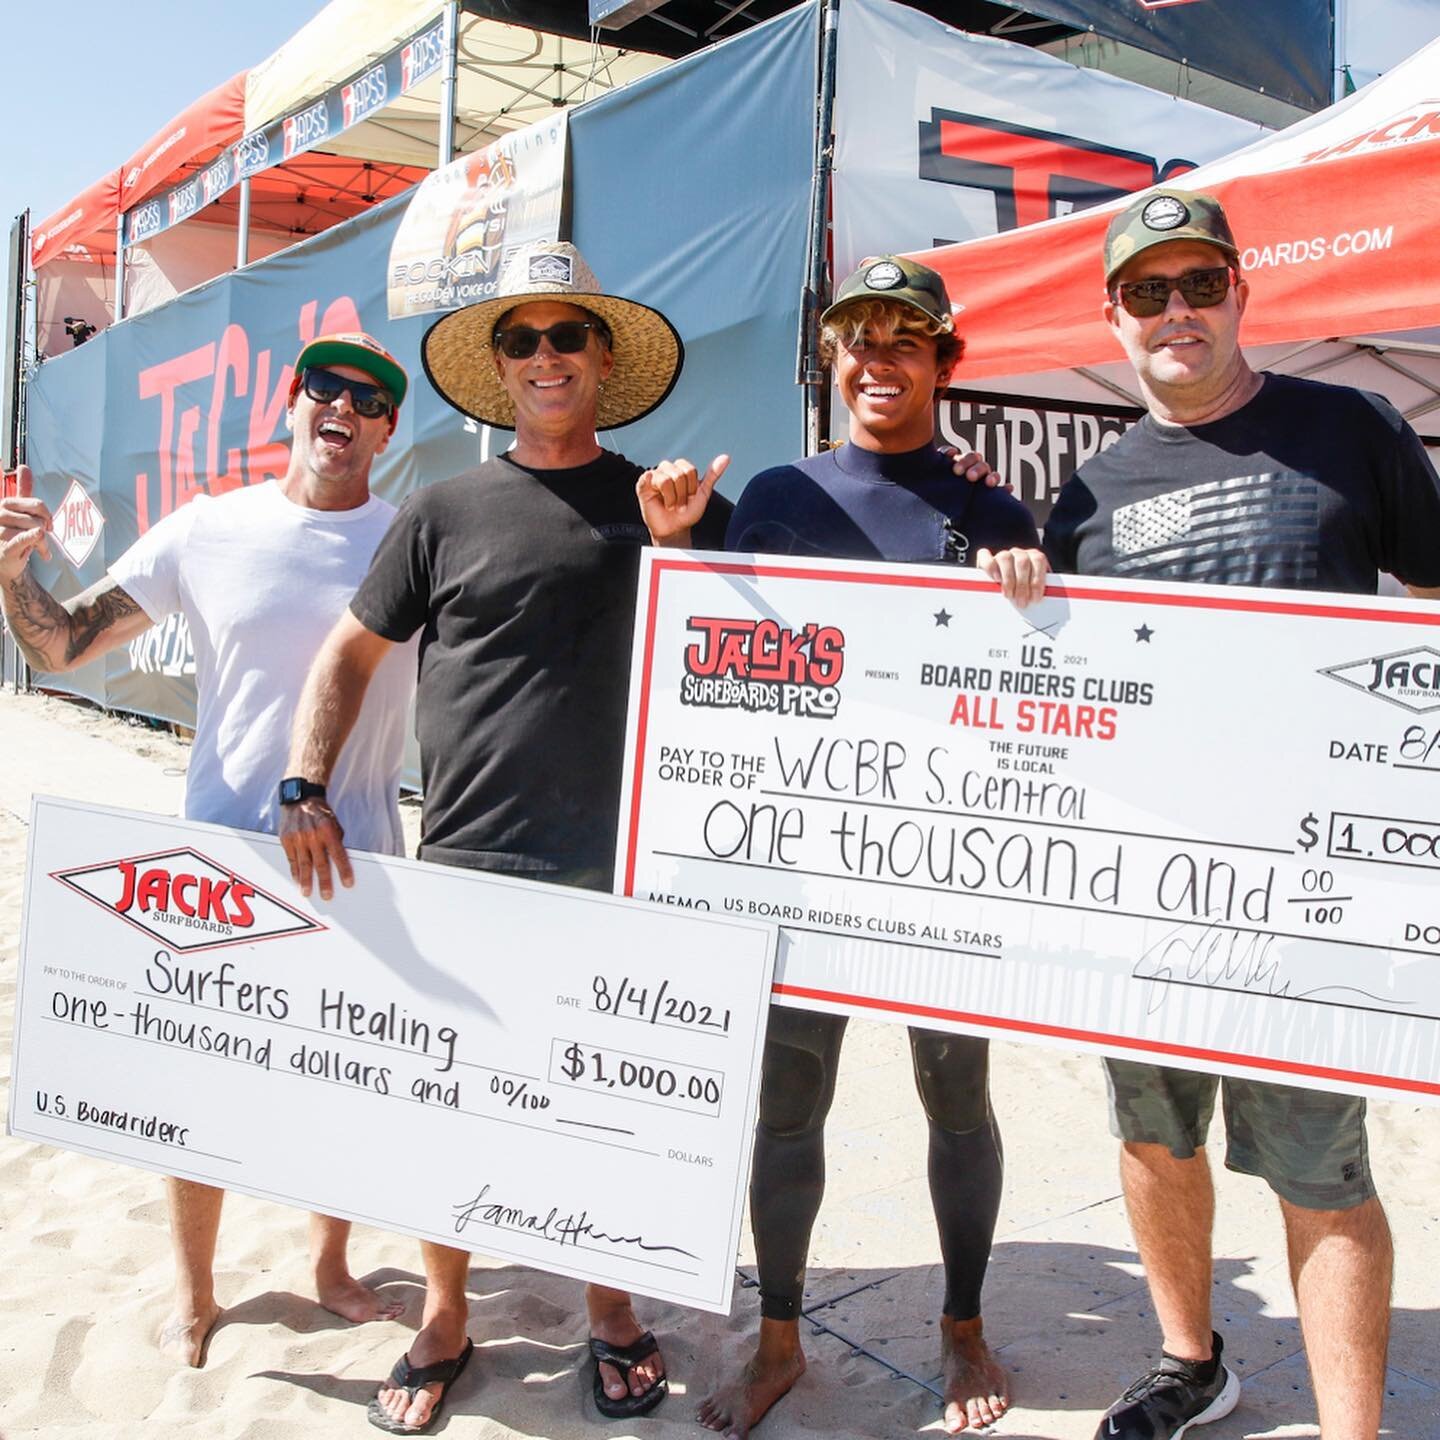 What a day we had on Wednesday at the first @usboardriders event &ldquo;The 2021 US Board Riders Clubs All-Stars presented by Jack&rsquo;s Surfboards&rdquo; Great waves, great weather, great vibes. In the end one team had to win, and when South Ce